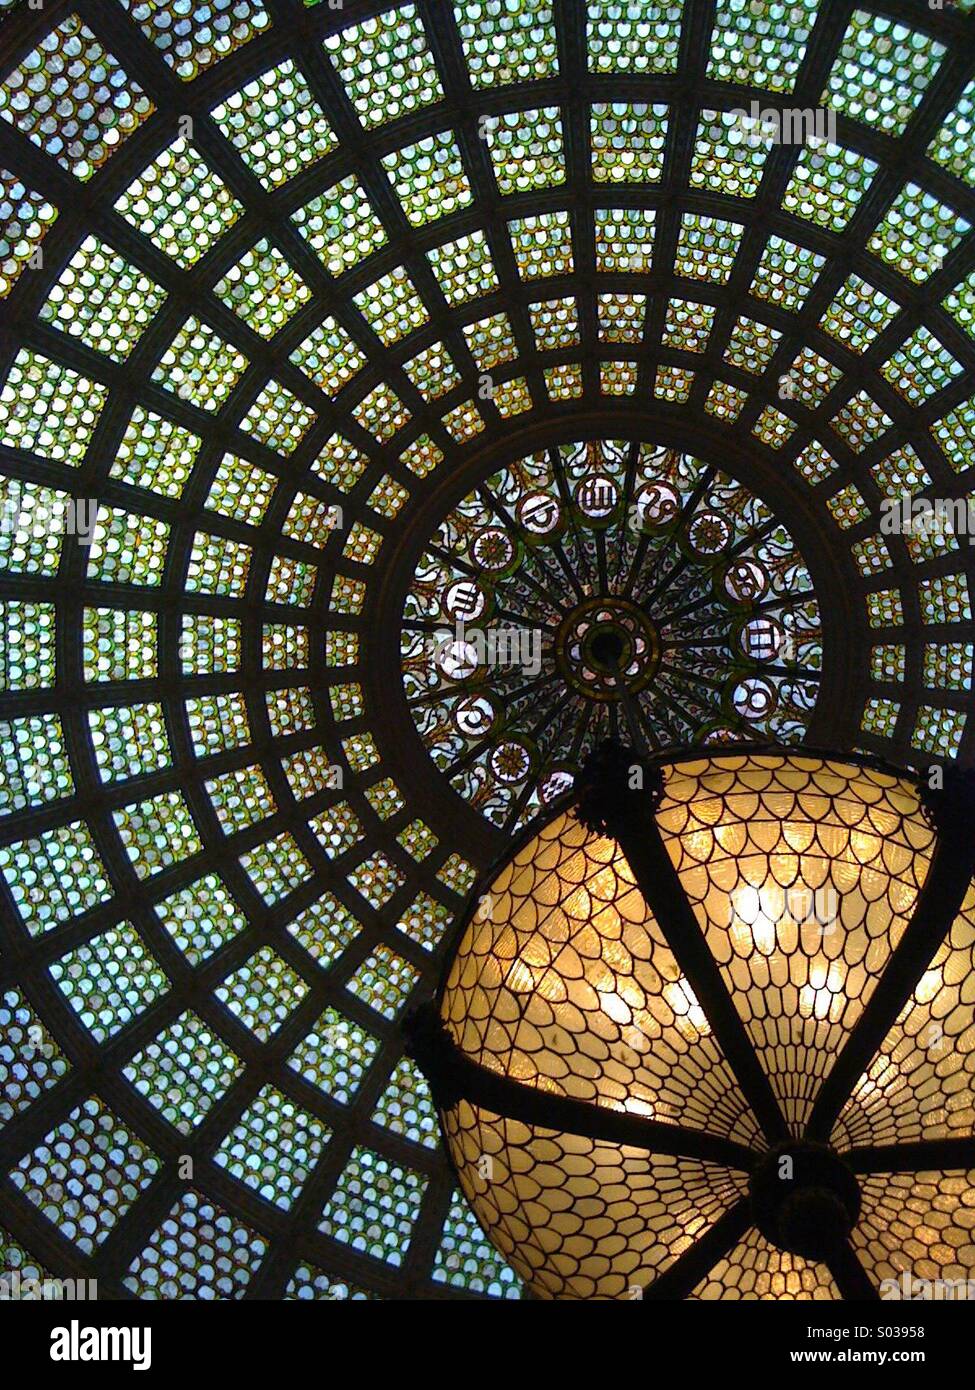 Stained Glass Dome Chicago Cultural Center Stock Photo